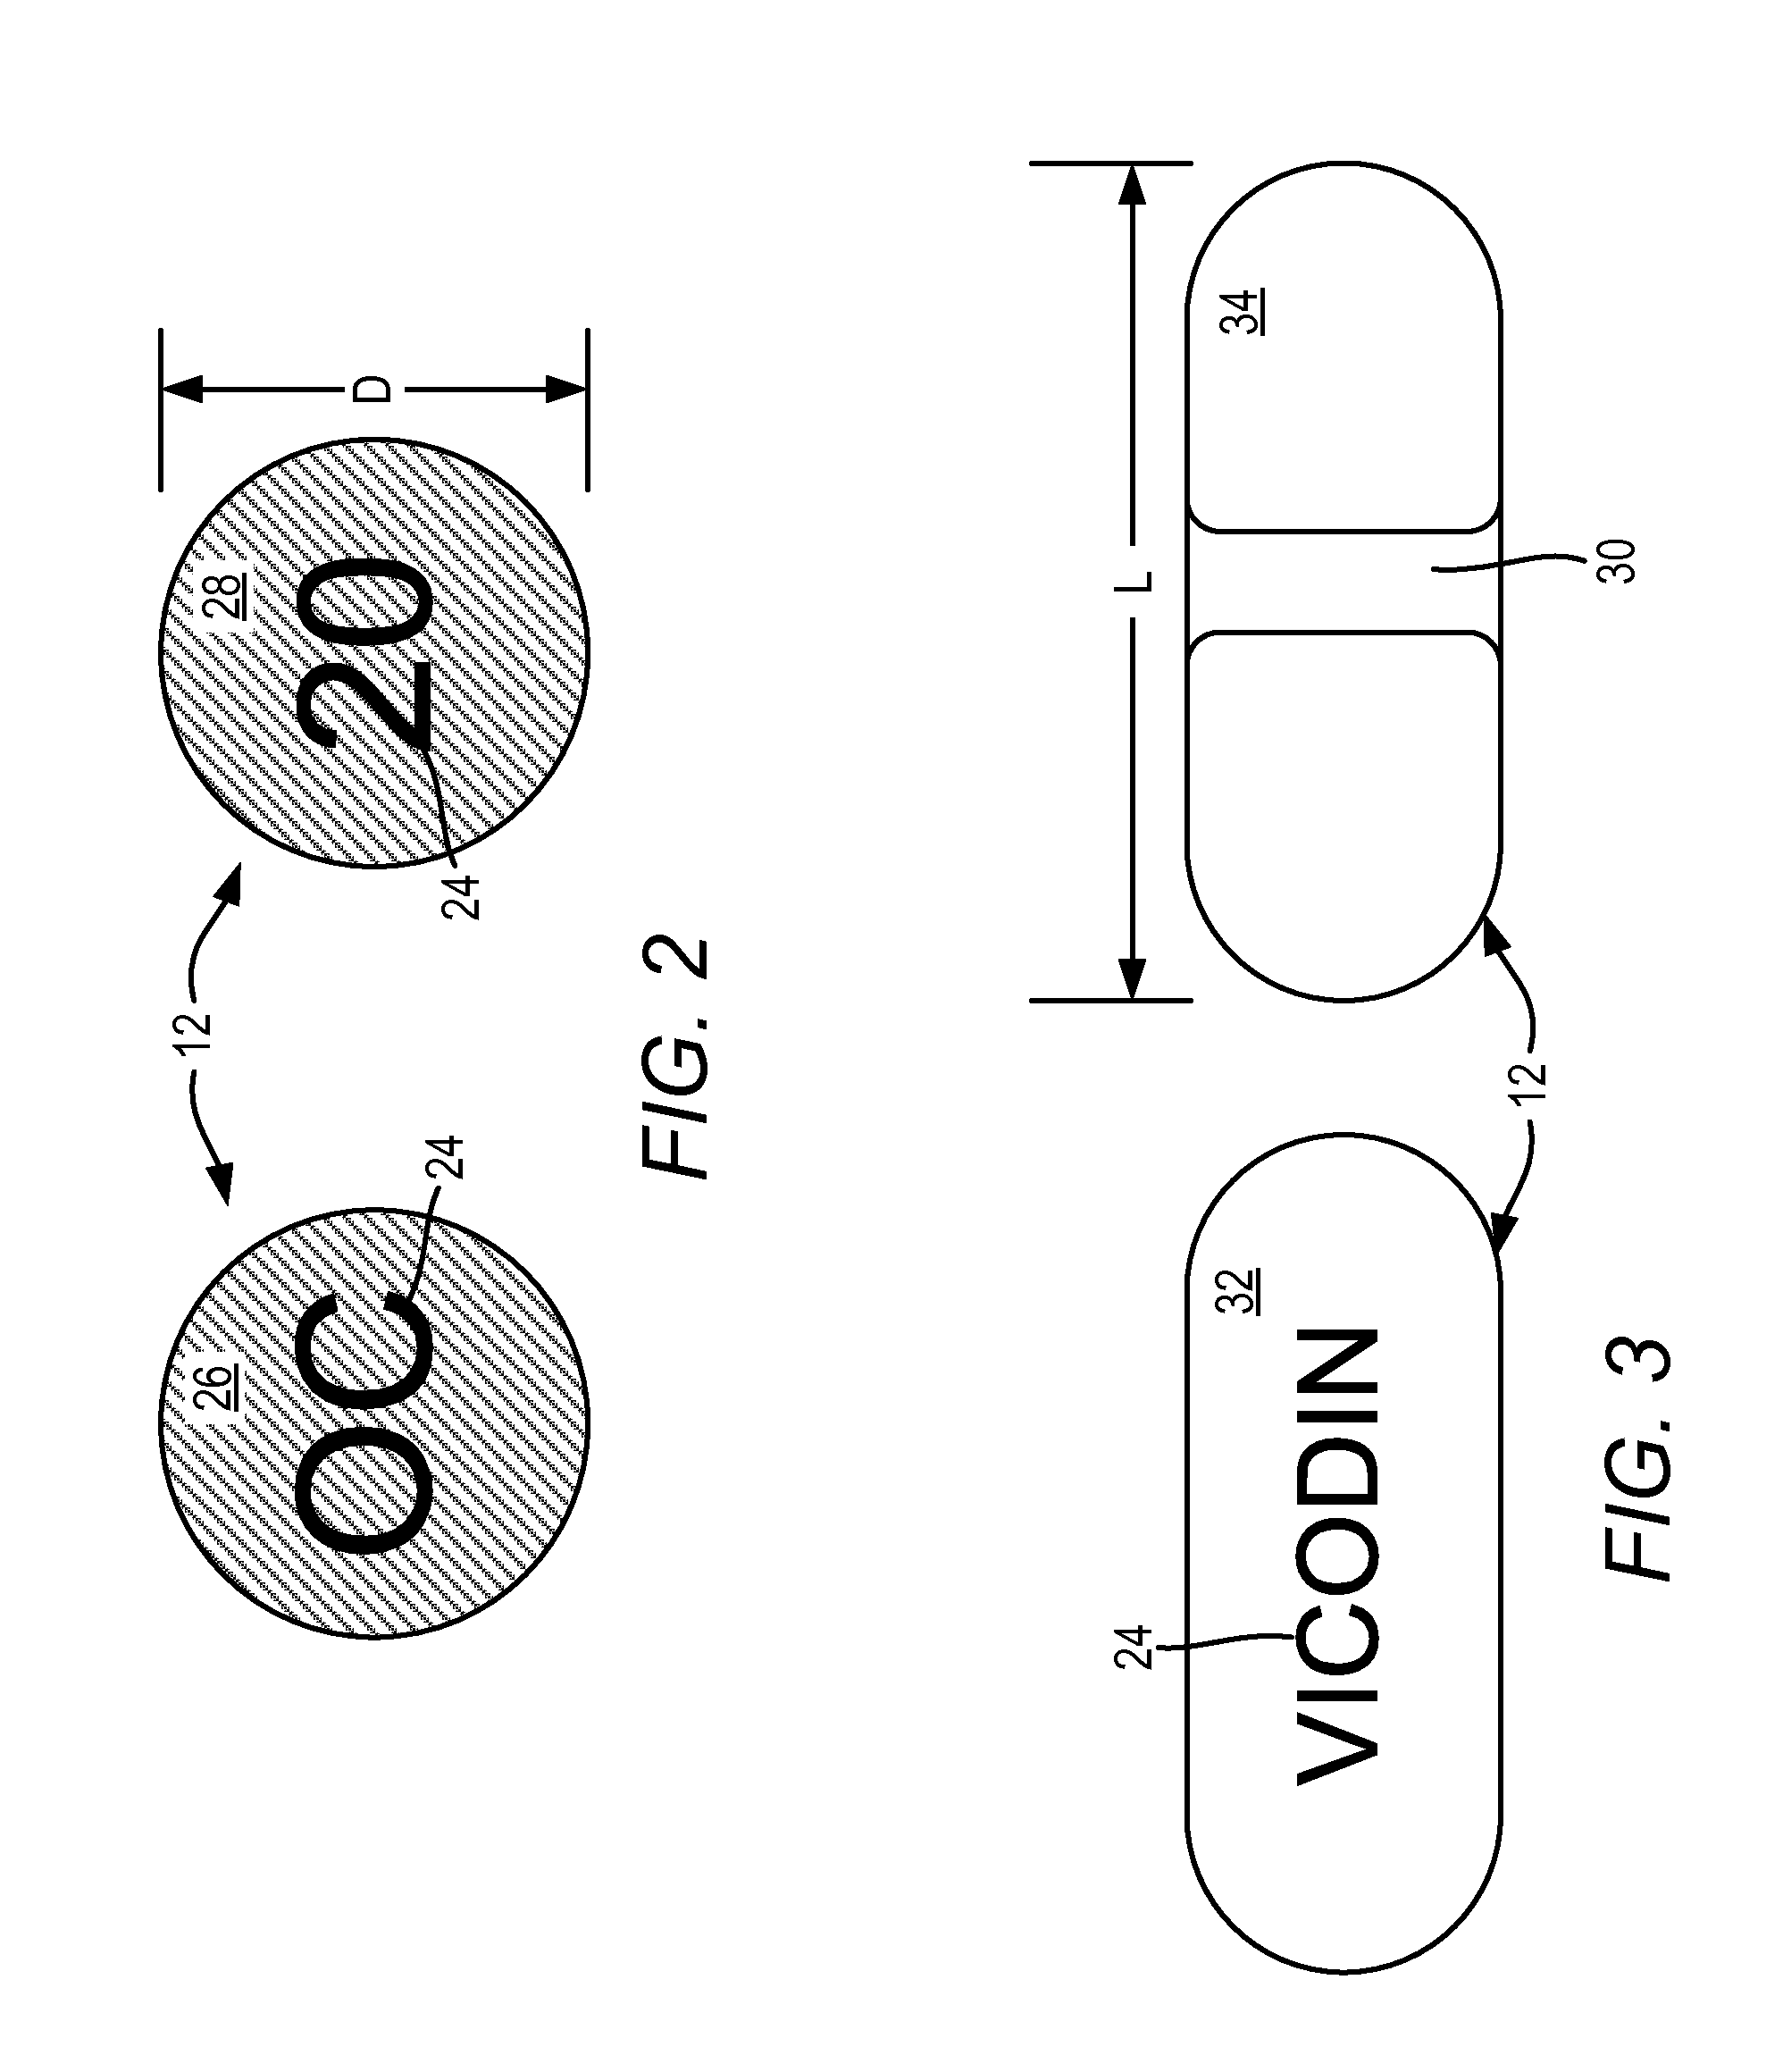 Medicinal substance recognition system and method